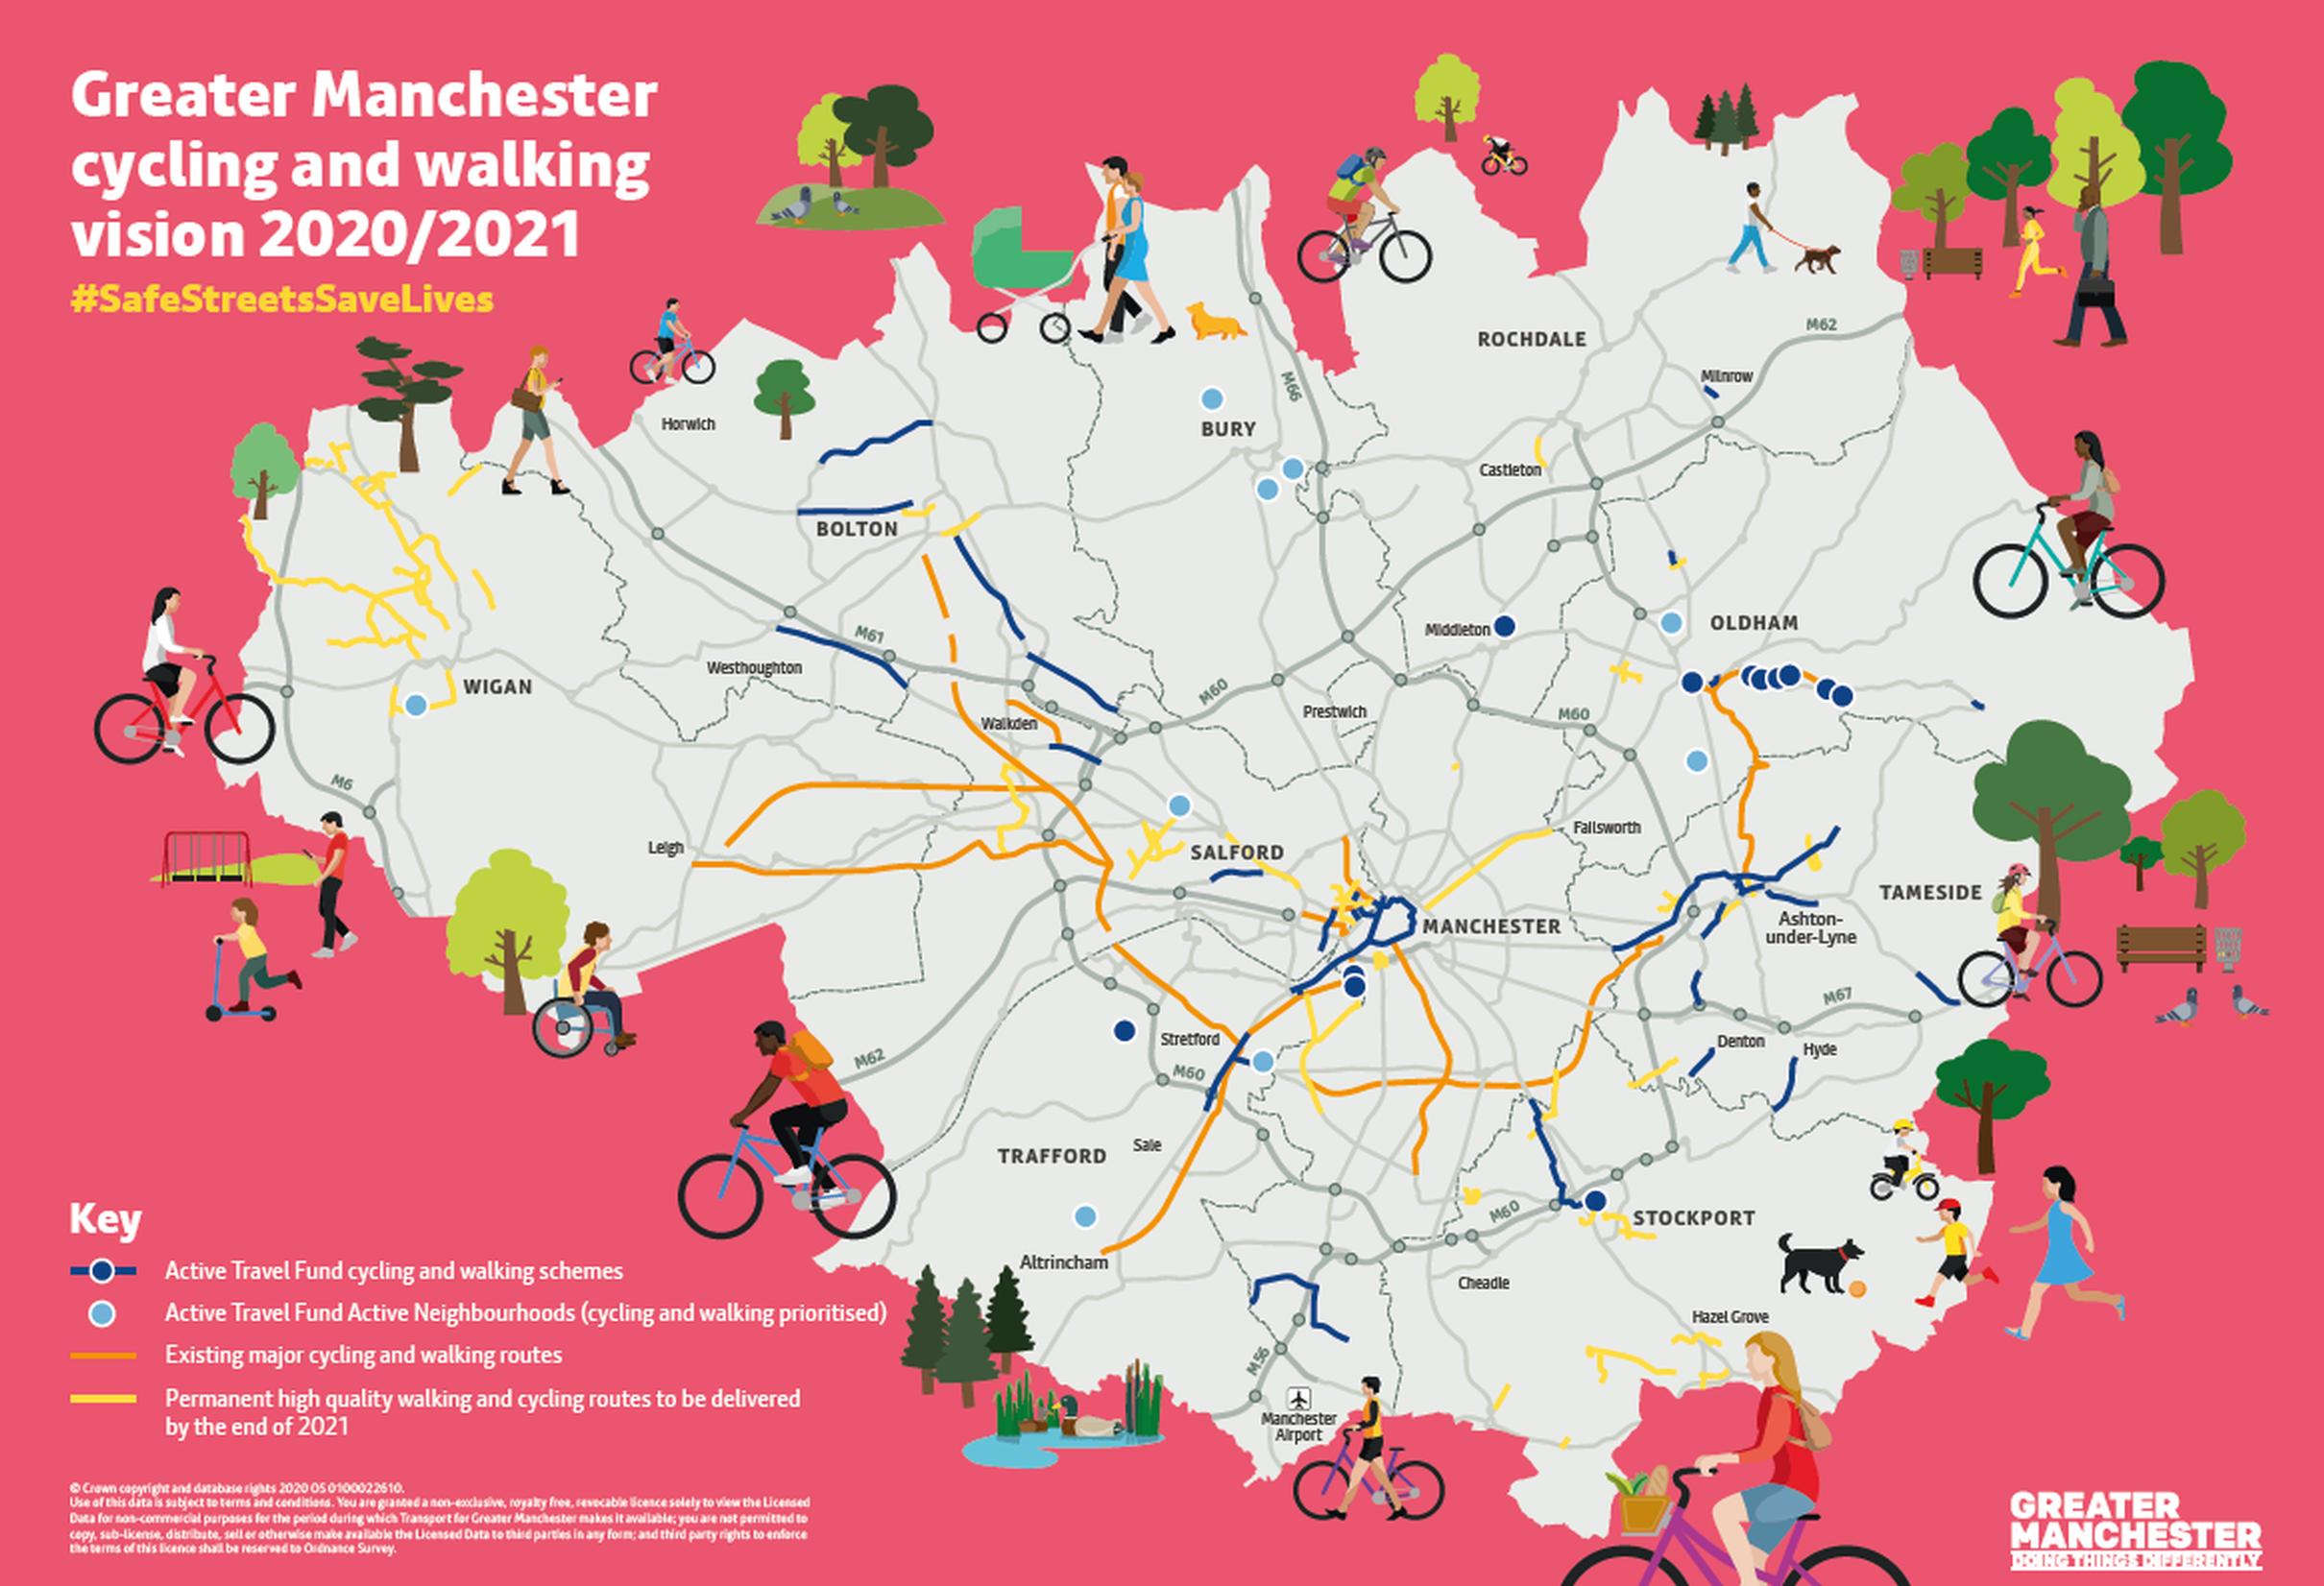 A new map showcasing the Greater Manchester city-region’s 12-month priority cycling and walking schemes. This includes the Active Travel Fund walking and cycling routes, as well as the Bee Network routes and active neighbourhoods that will be delivered by December 2021.